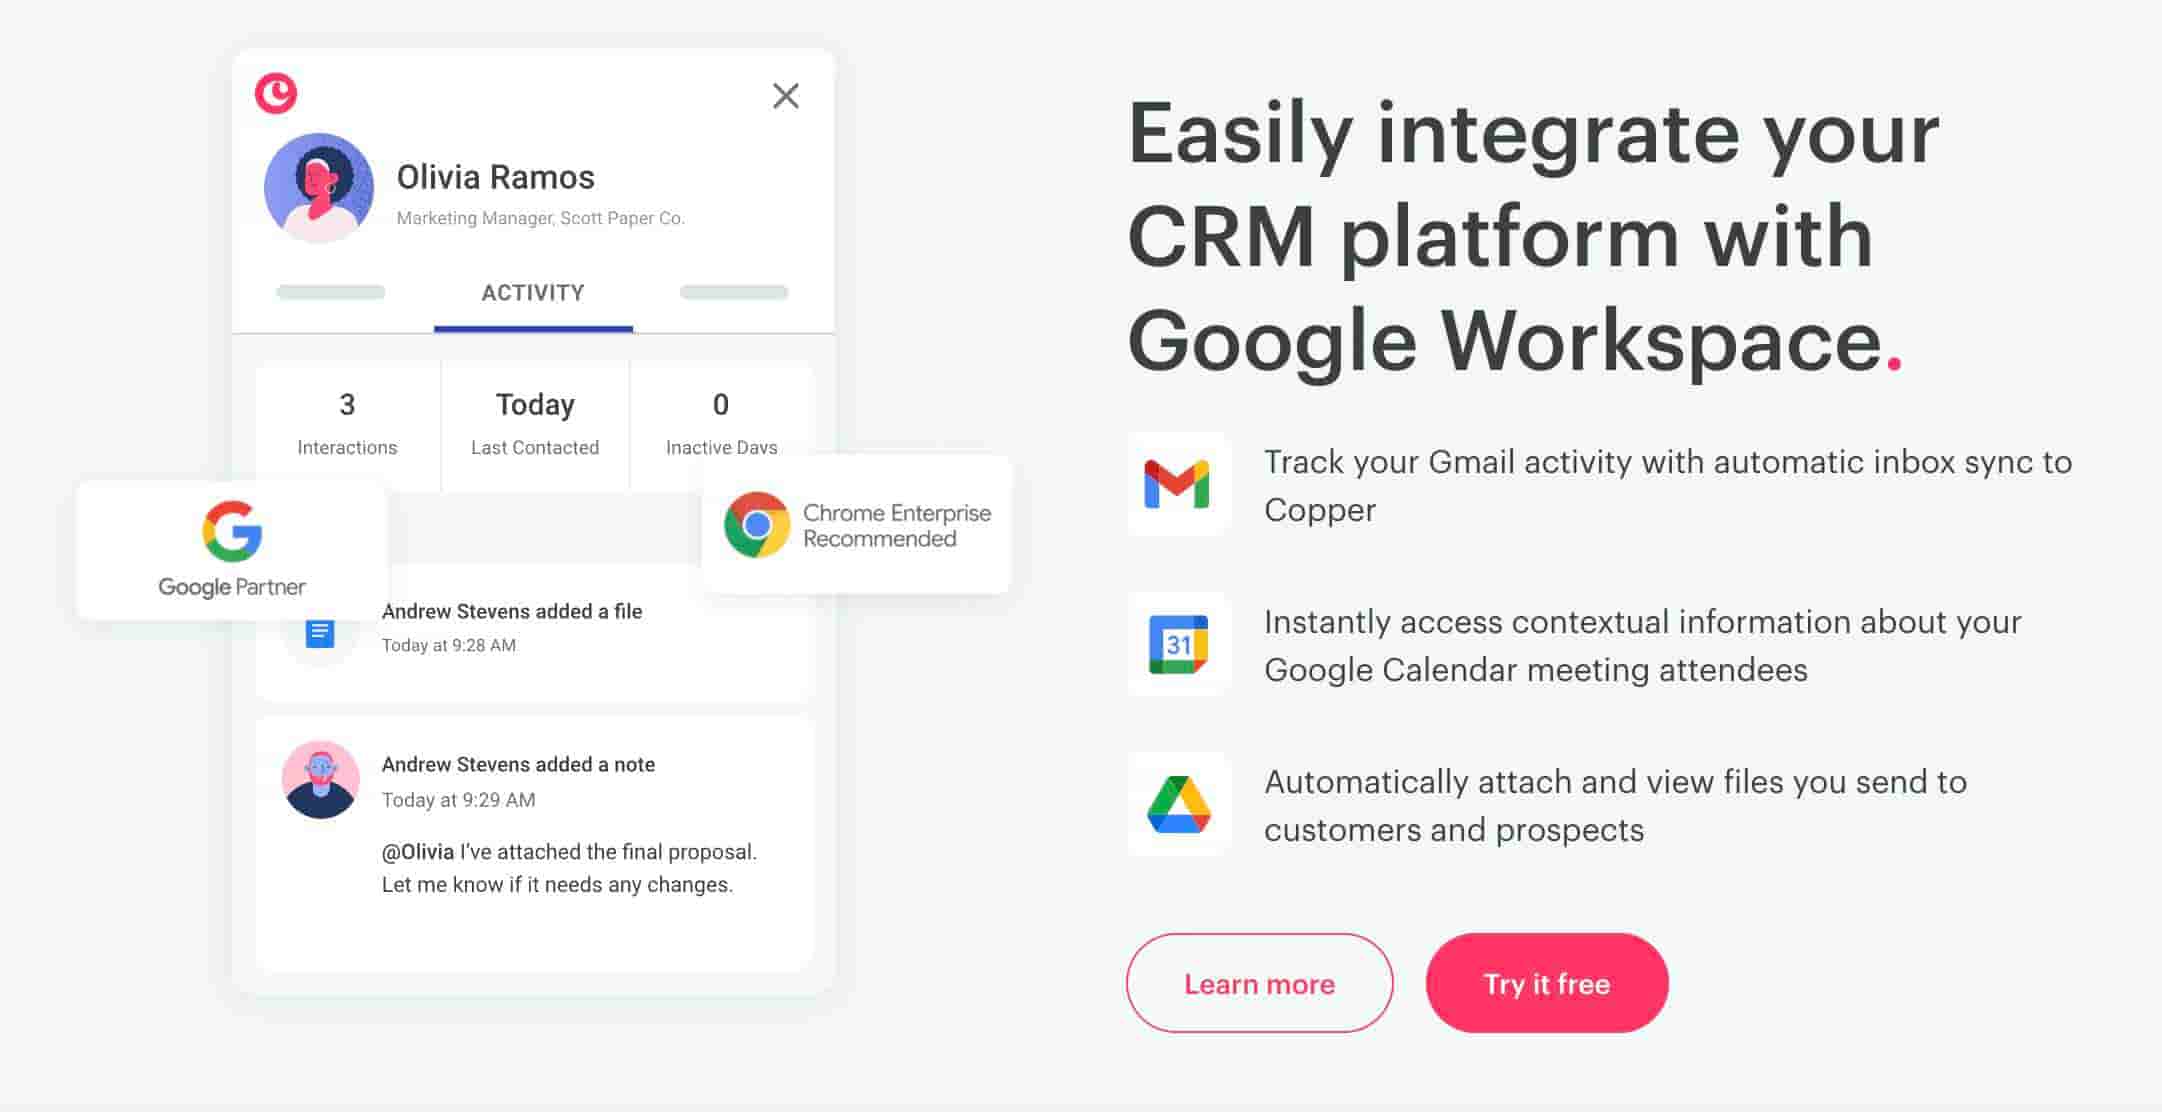 Copper is a CRM solution for Google Workspace users